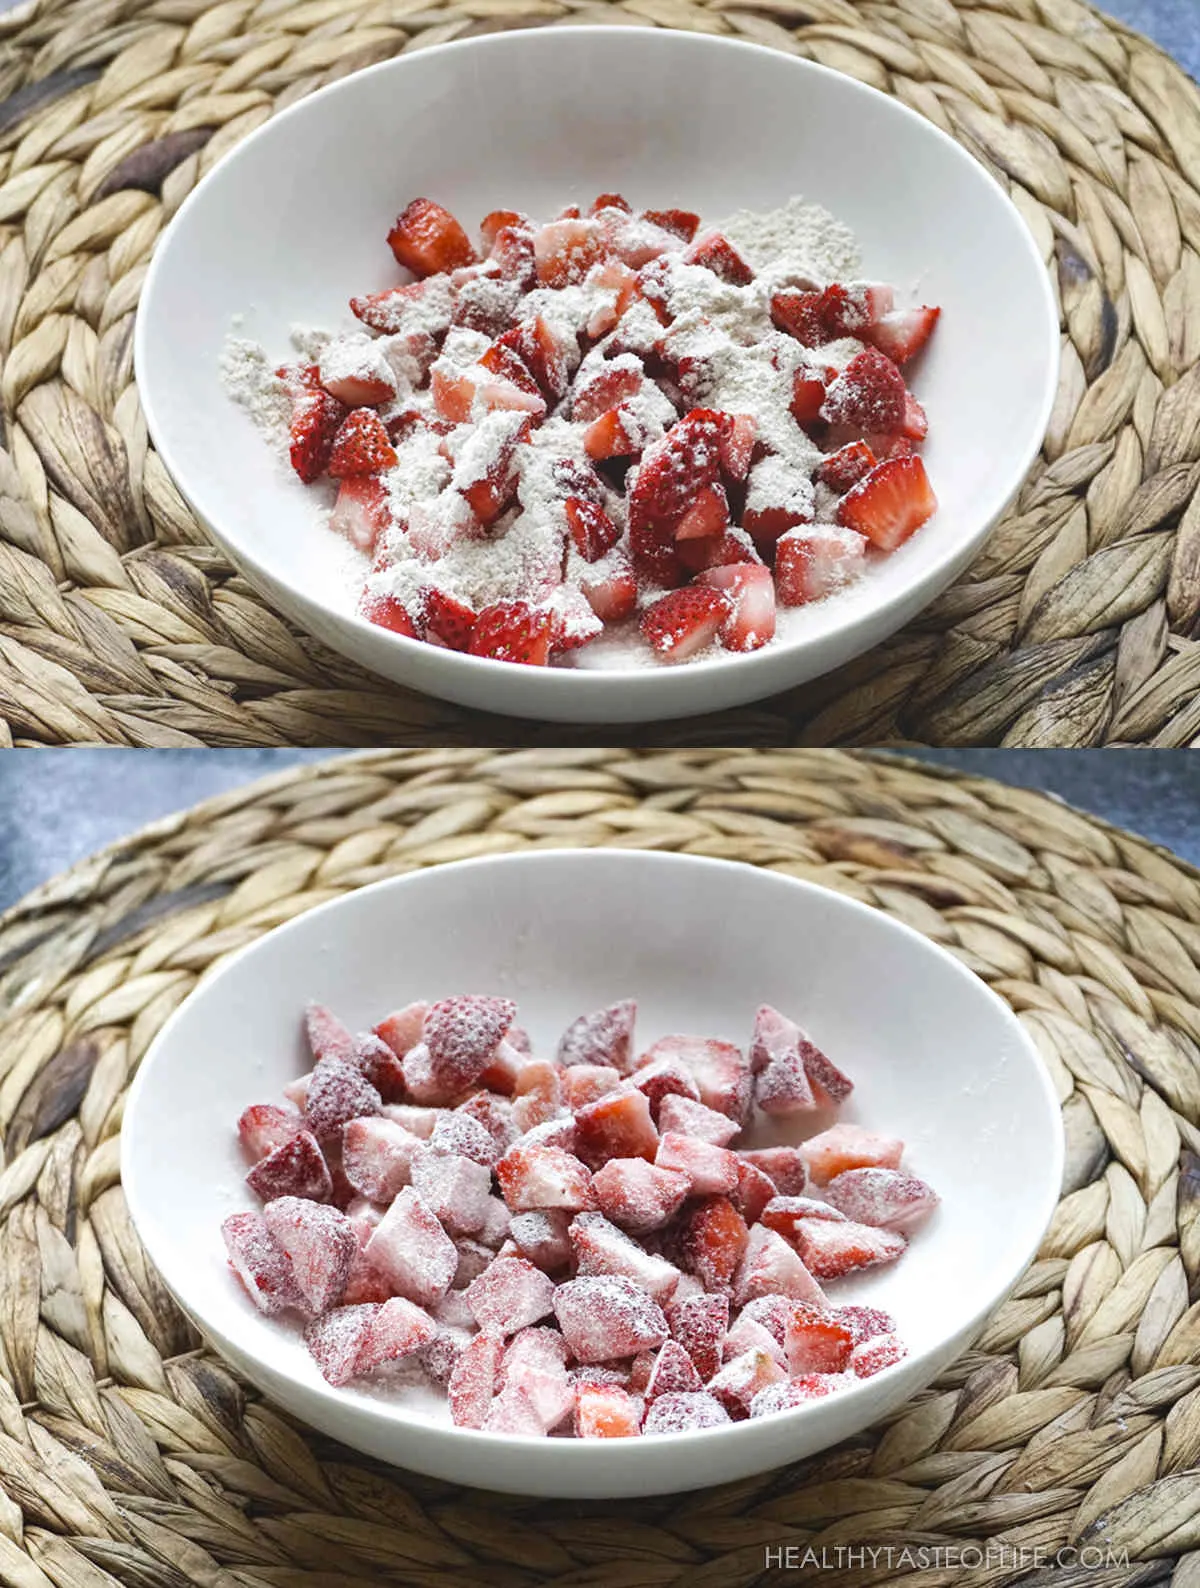 Picture showing a tip on how to coat the frozen strawberries with flour to prevent sinking in the batter.